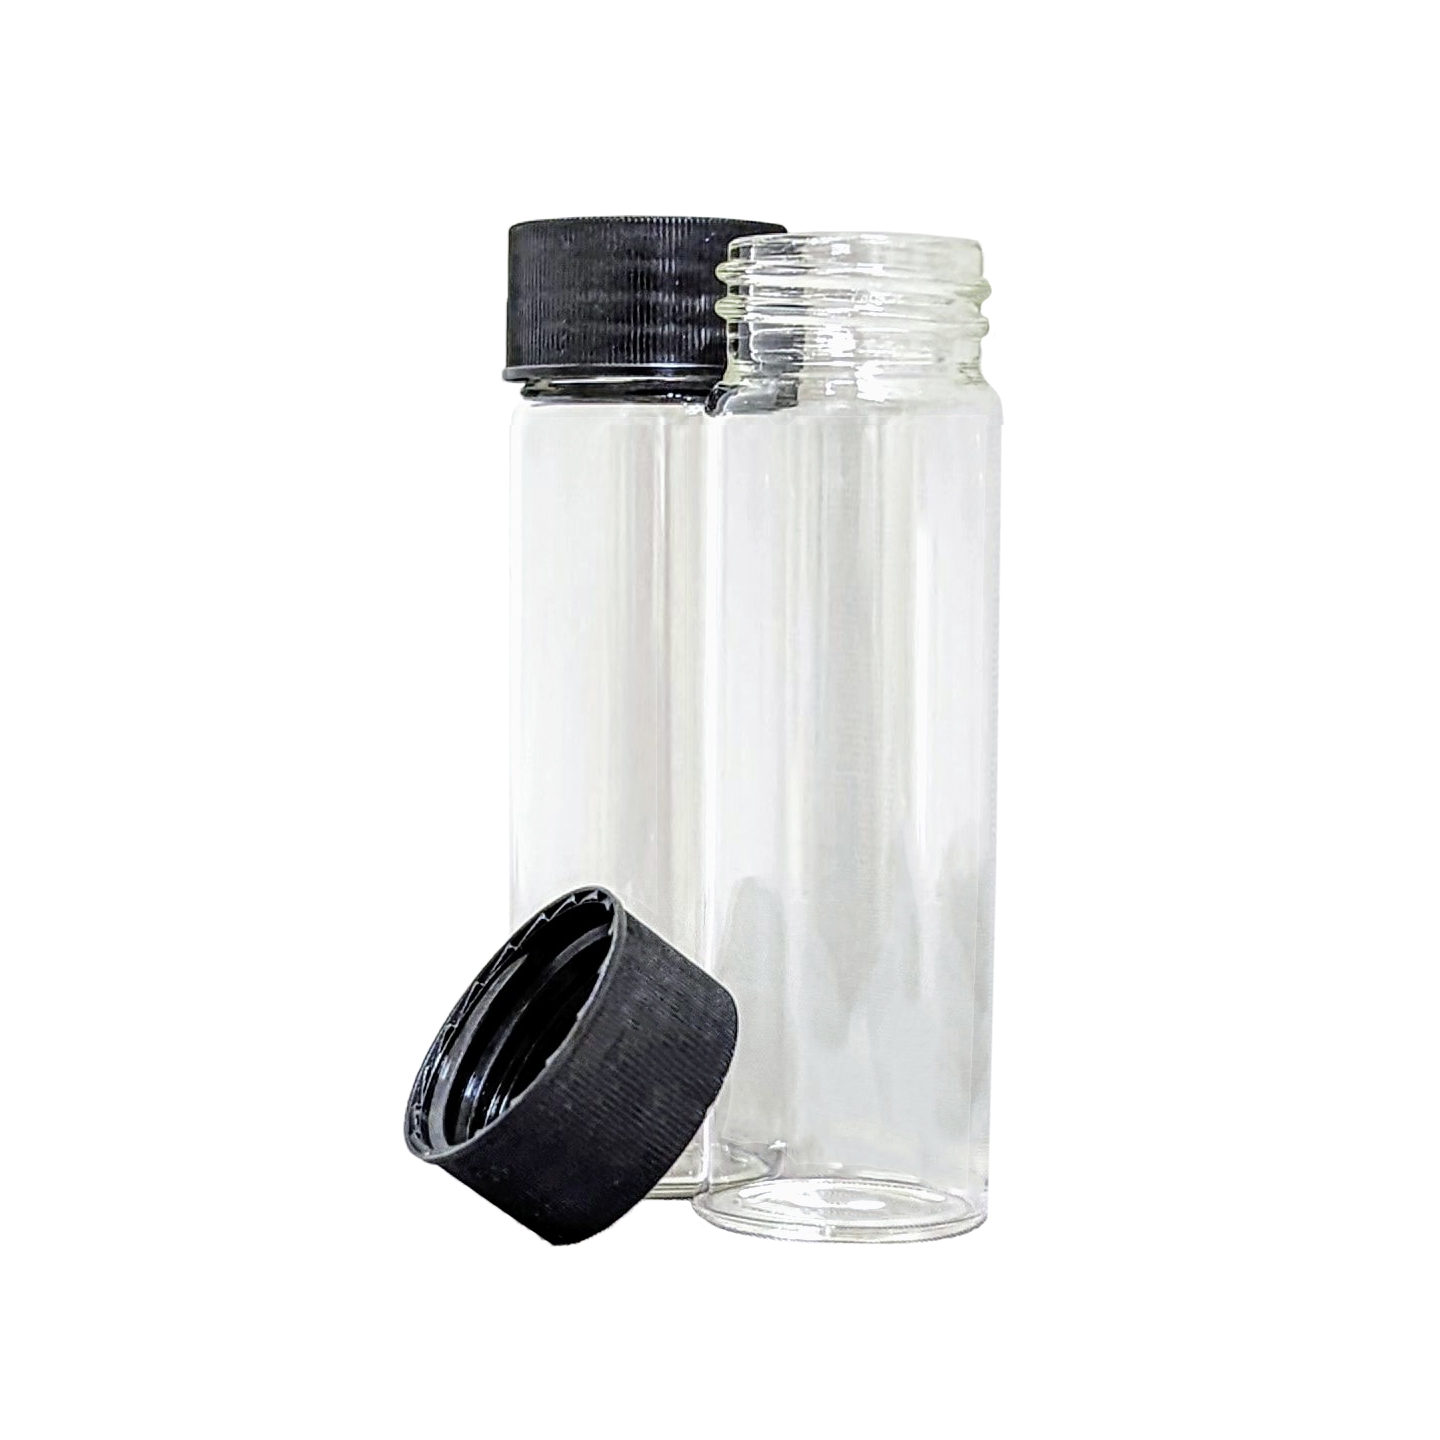 Vial, Screw Neck Vials, Tall Form, Capacity 1.75ml, With Unattached Polypropylene Closure